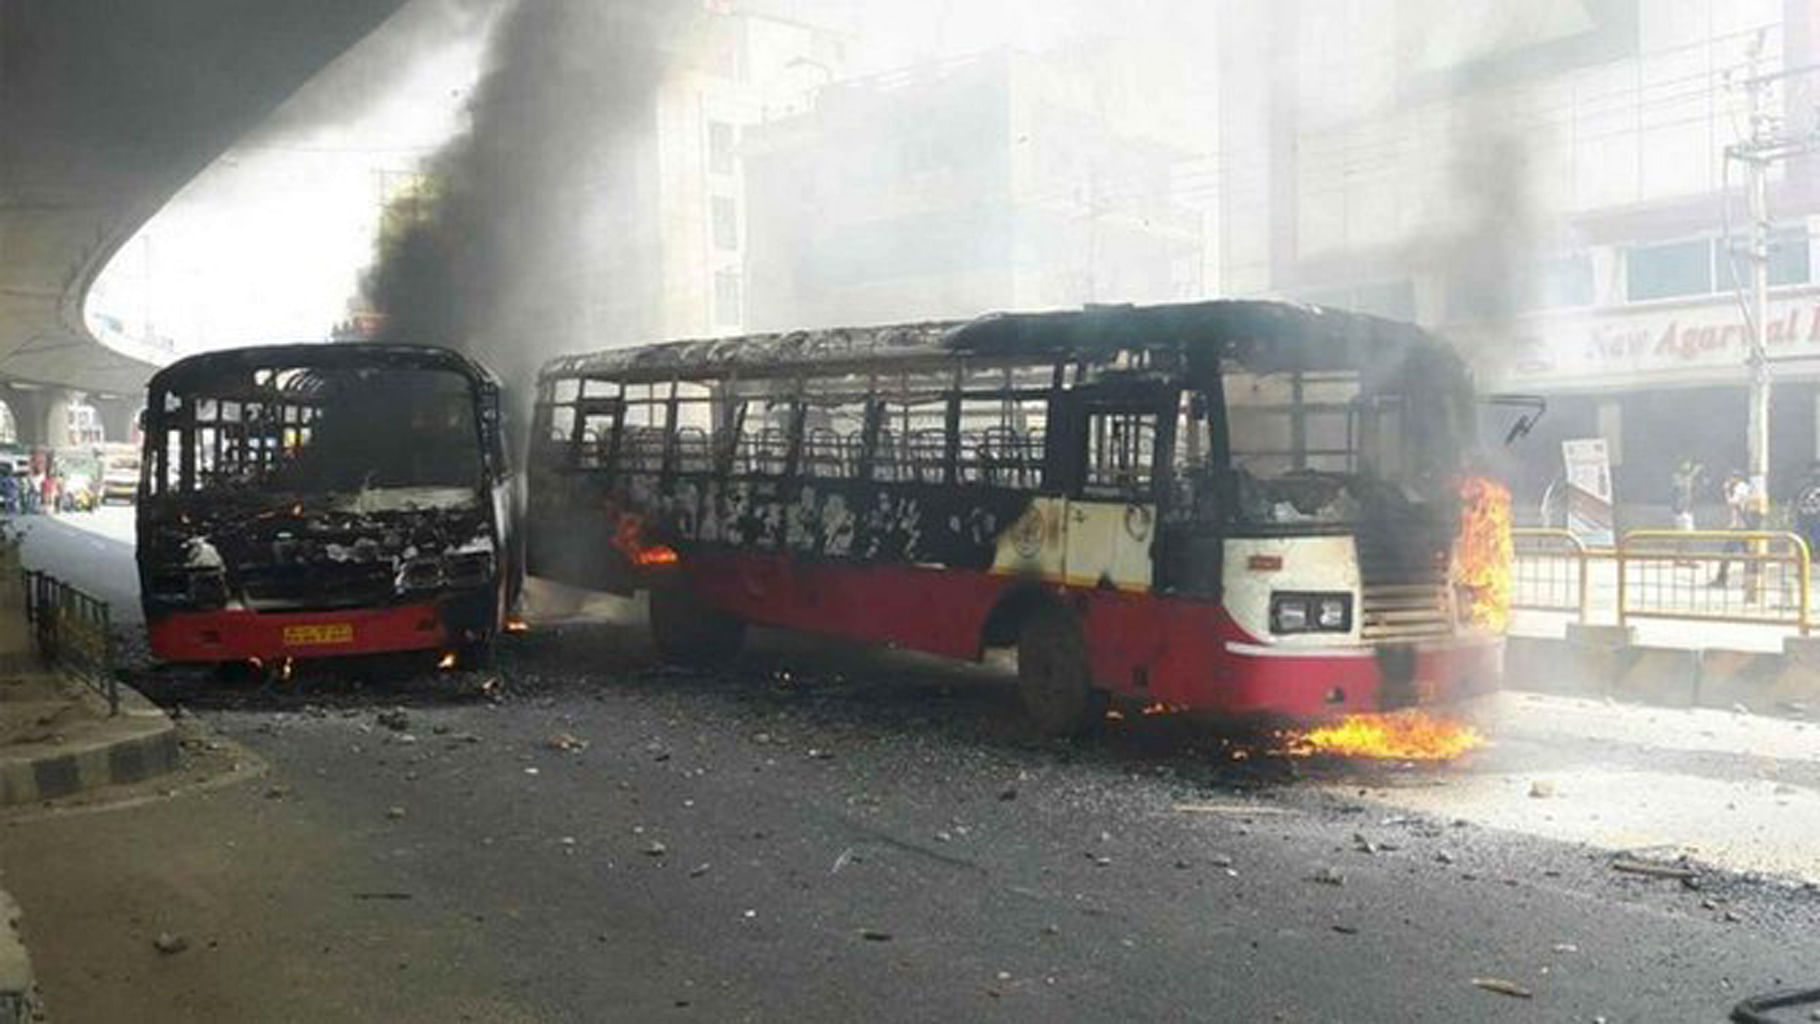 Vehicles, including government buses, in Kalaburagi were vandalised after the cabinet reshuffle. This image is for representational purposes. (Photo Courtesy : <a href="https://twitter.com/BlrCityPolice">Twitter/@BlrCityPolice</a>)